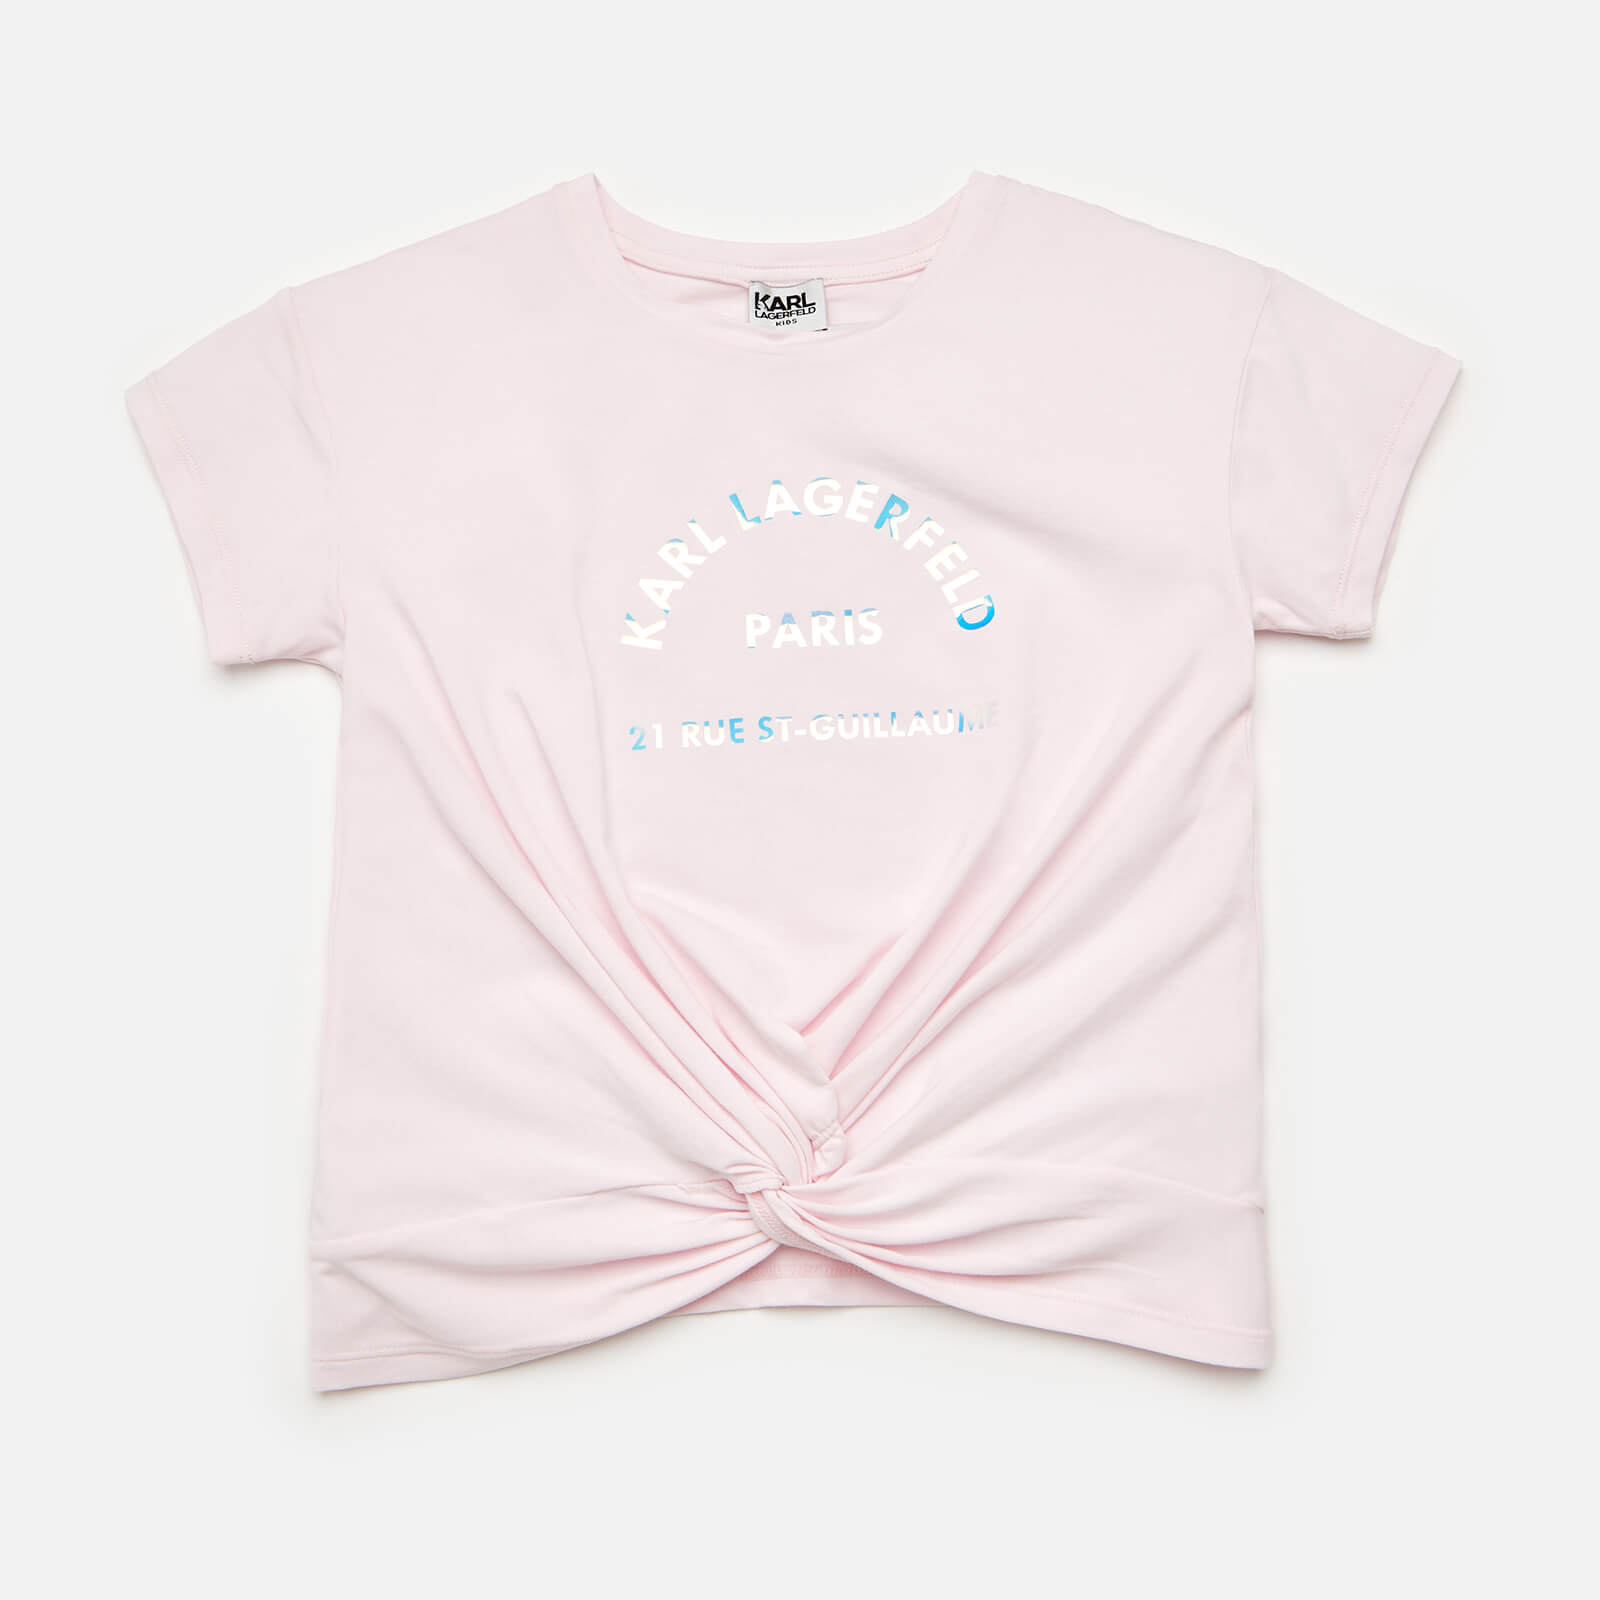 KARL LAGERFELD Girls' Tie Front T-Shirt - Pink - 6 Years